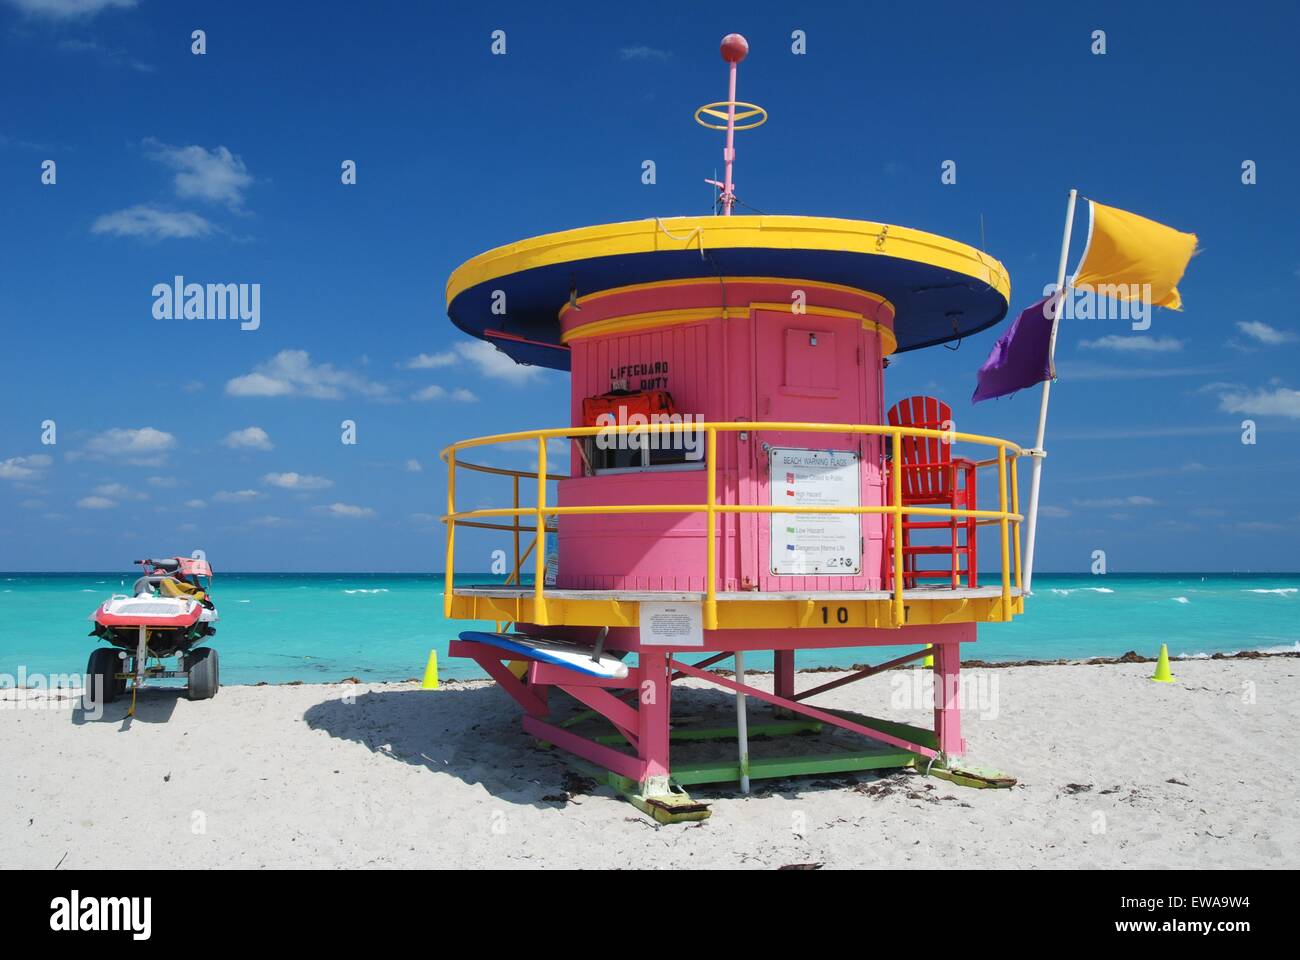 Pink and yellow, round art deco lifeguard station and beach buggy, South Beach, Miami, Florida, USA Stock Photo